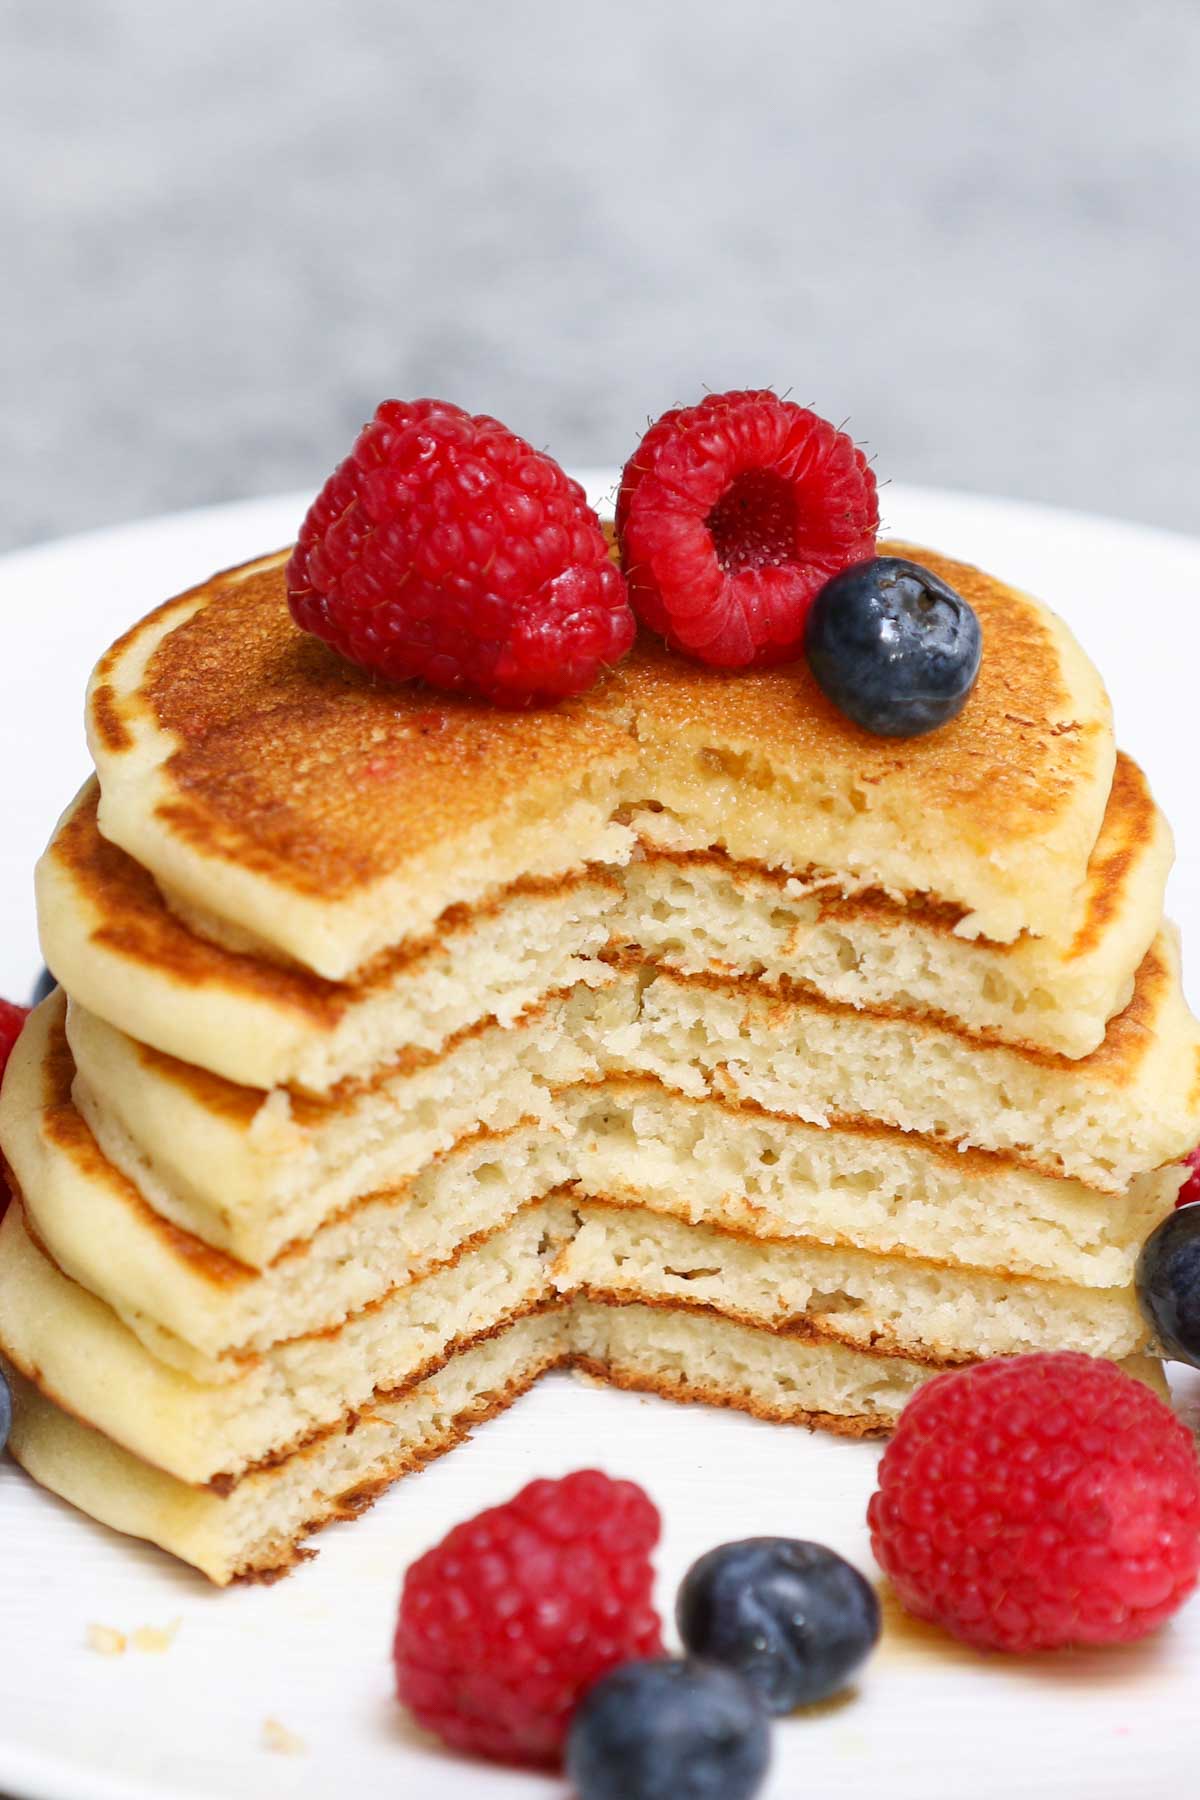 These Easy Griddle Cakes (Griddle Pancakes) are light and fluffy – a classic breakfast food that calls for a few simple ingredients. This recipe provides step-by-step instructions for cooking the batter on an electric griddle. You can serve them with maple syrup, jam, or fruits for a delicious meal!